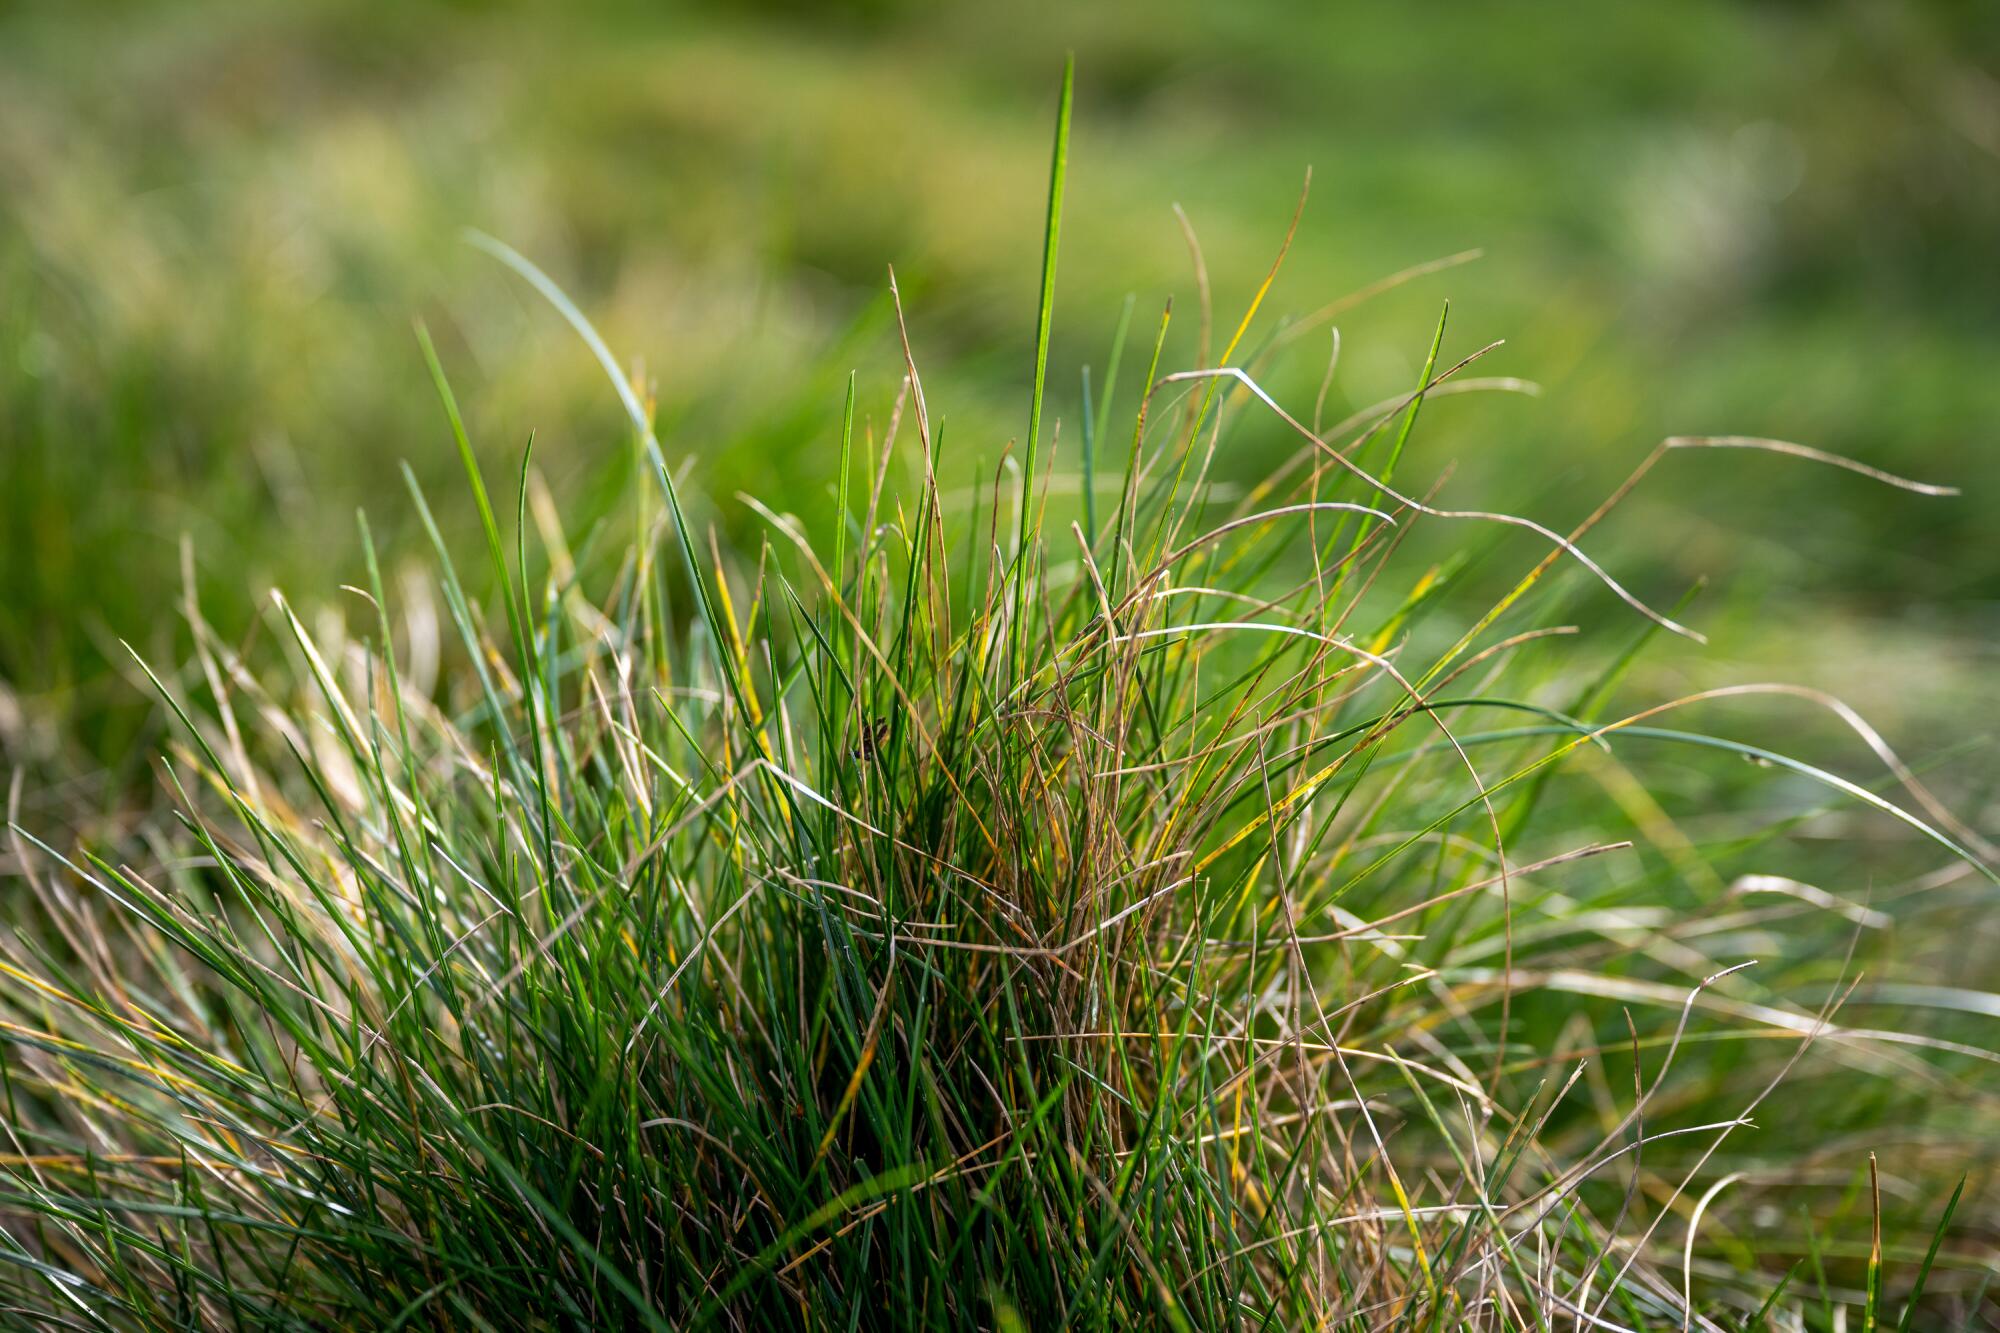 A close up of a tuft of fescue grass.